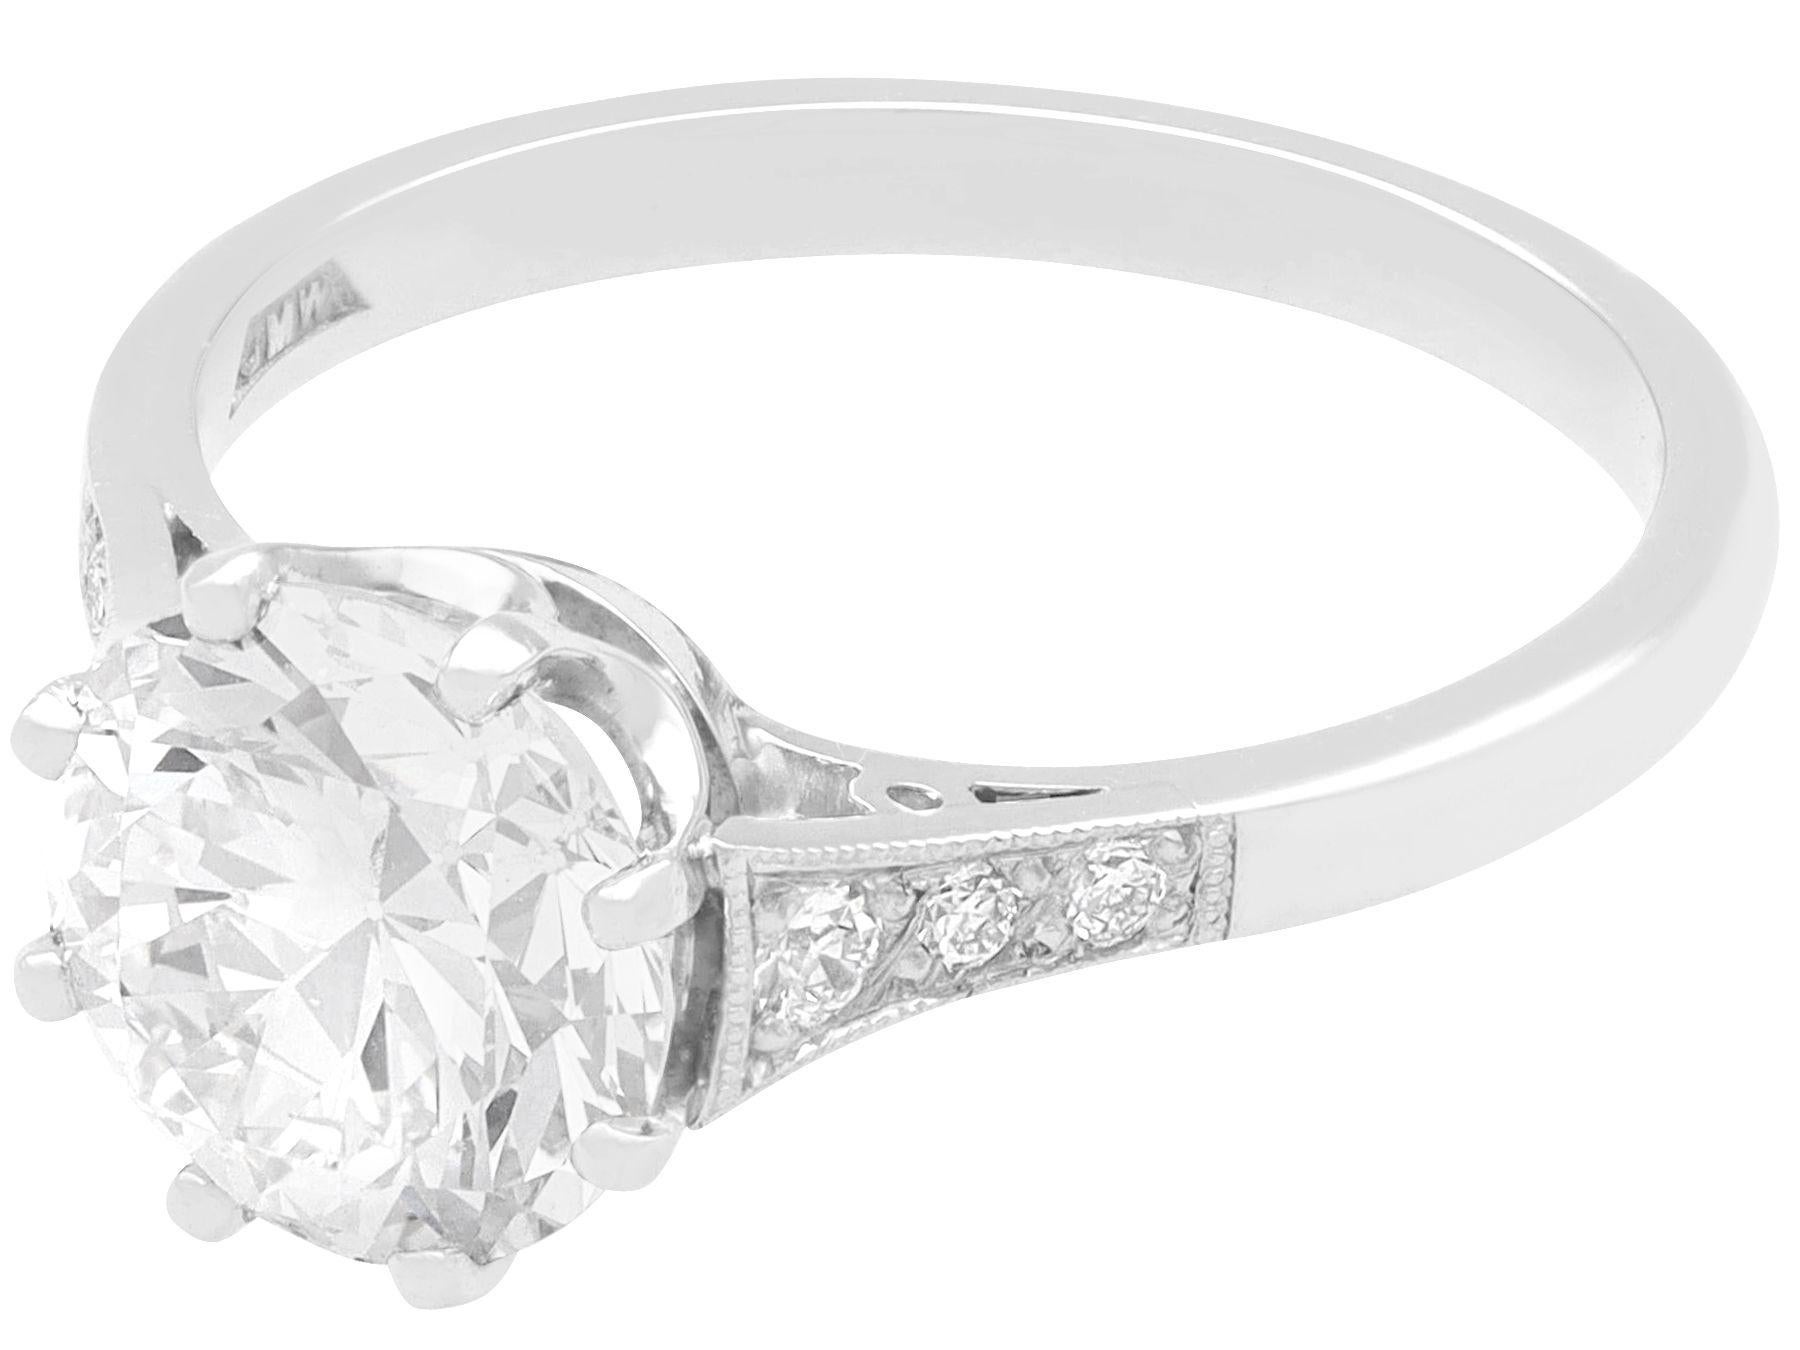 A stunning, fine and impressive antique 2.38 carat diamond and platinum solitaire engagement ring; part of our diverse jewelry and estate jewelry collections

This stunning, fine and impressive engagement ring has been crafted in platinum.

The